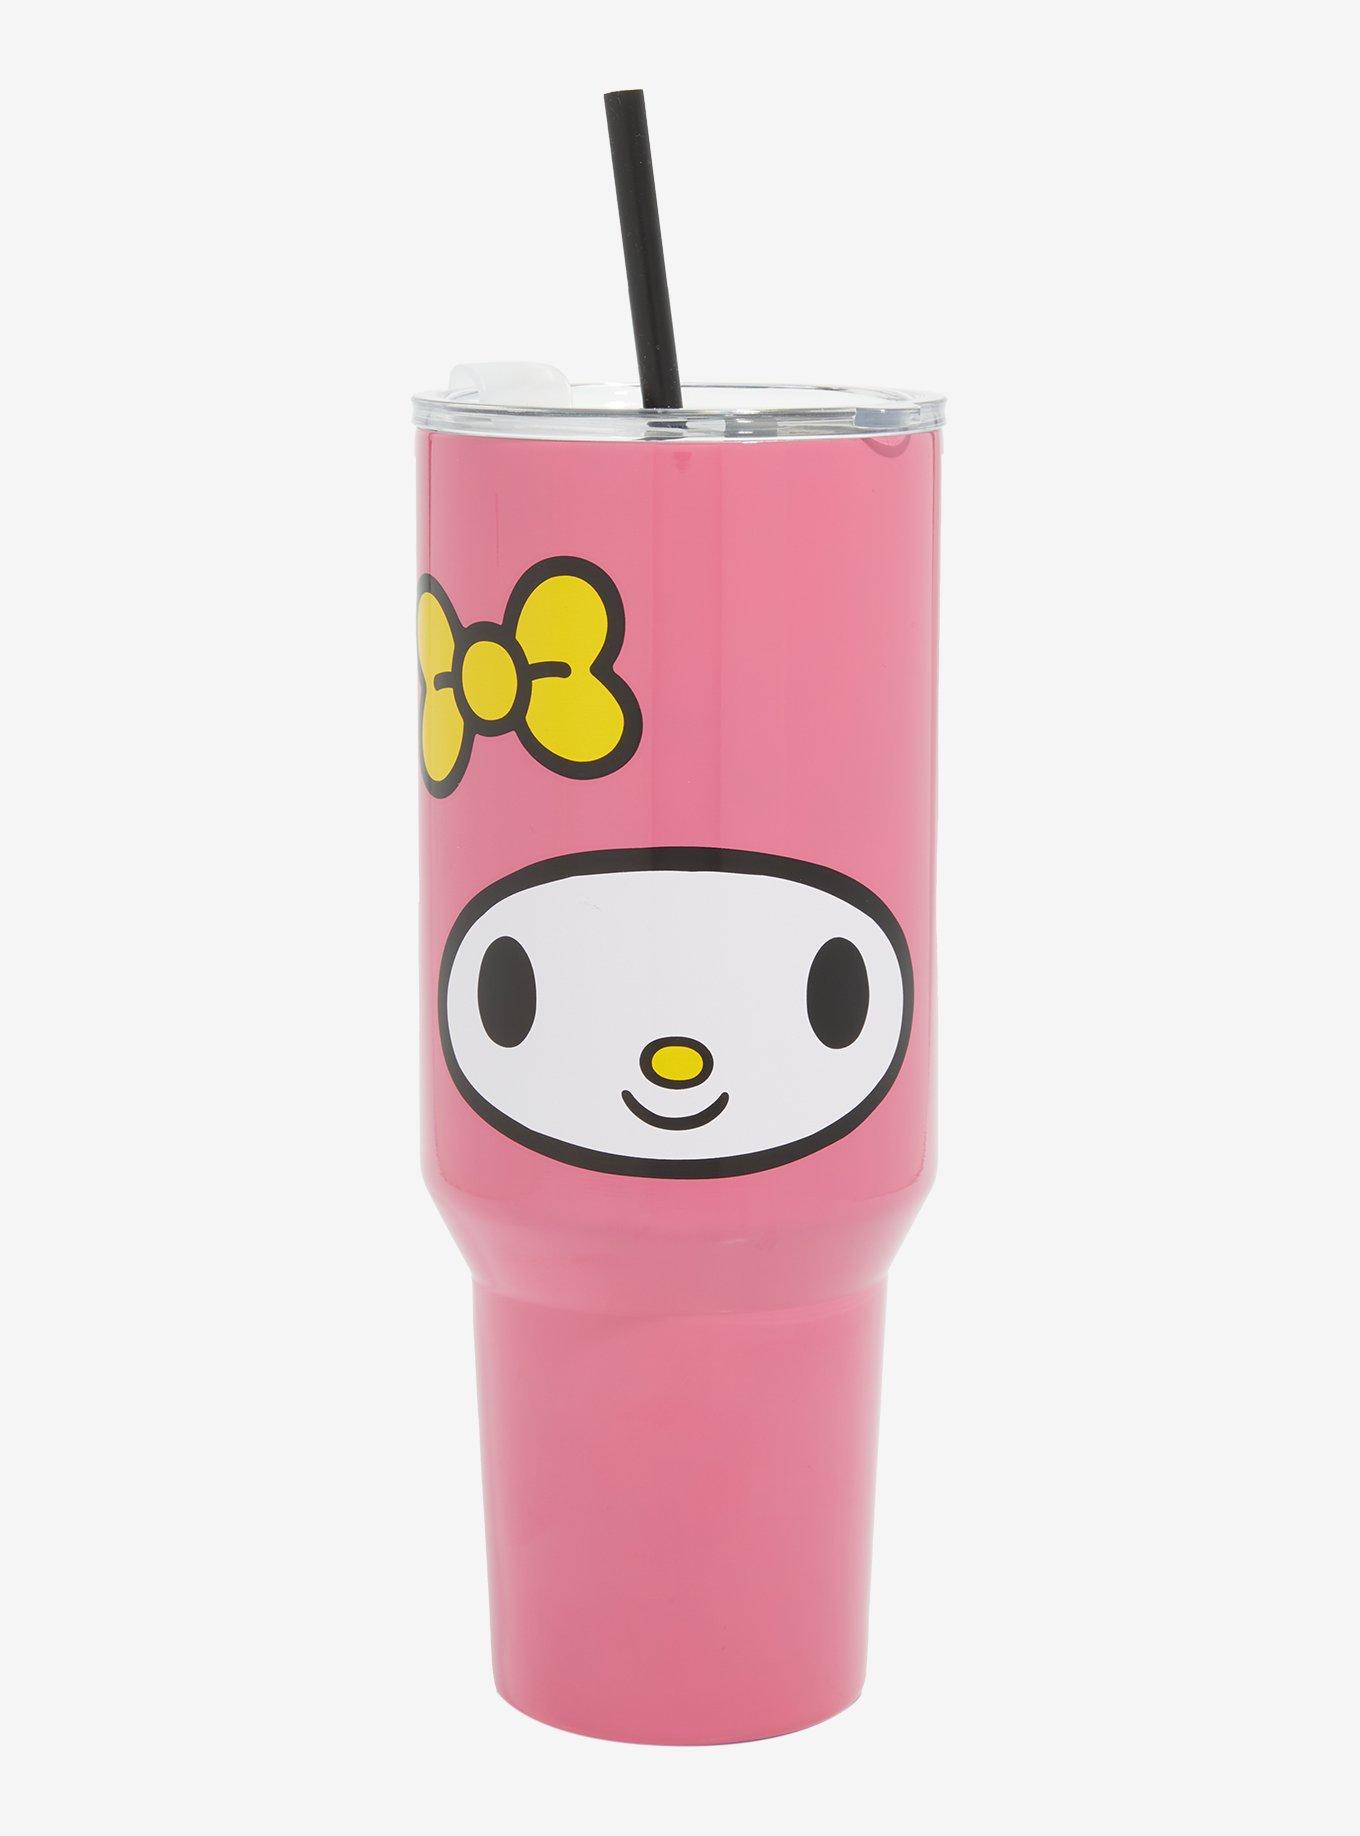 Nintendo Kirby Foods Stainless Steel Can Cup